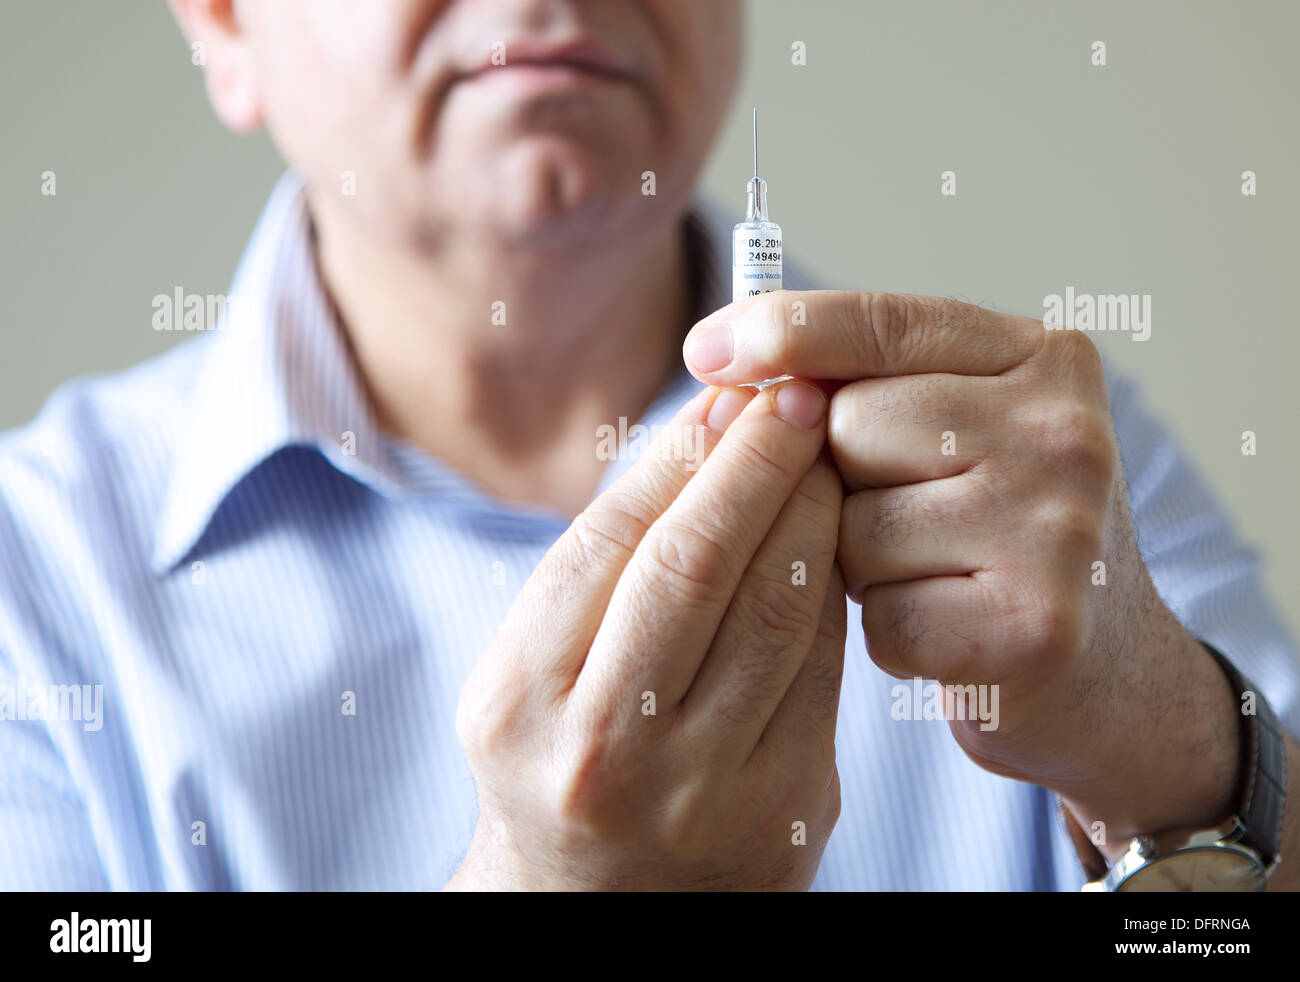 Doctor GP prepares to give the flu jab injection to a patient Stock Photo